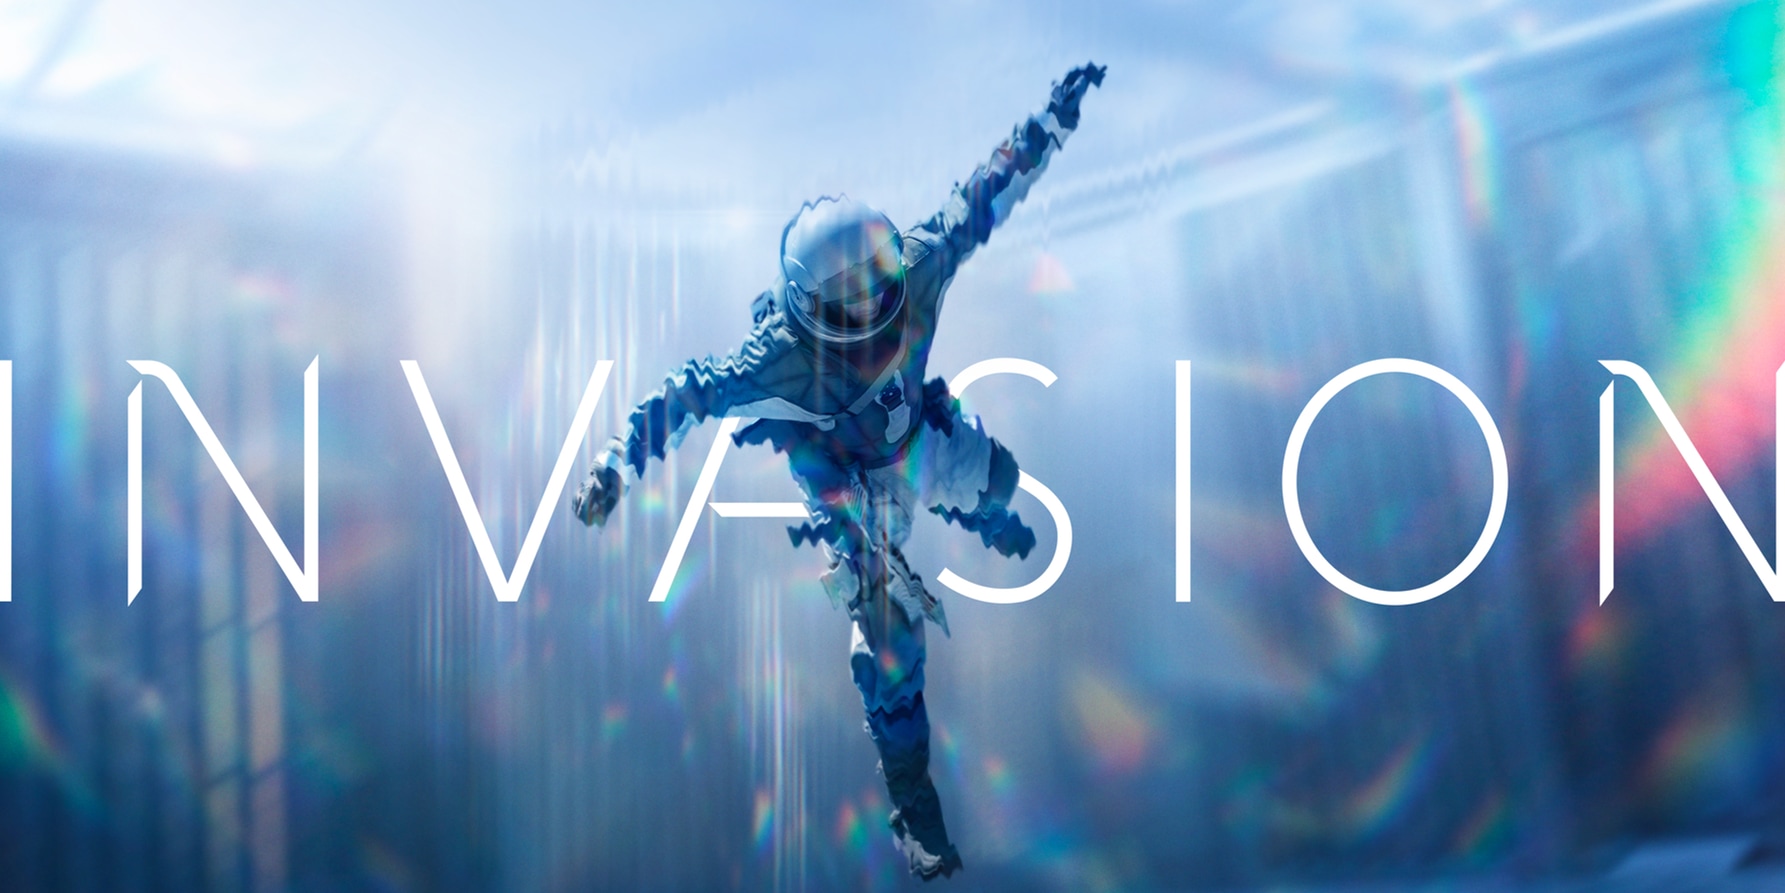 Sci-fi series Invasion returns for season two today on Apple TV+